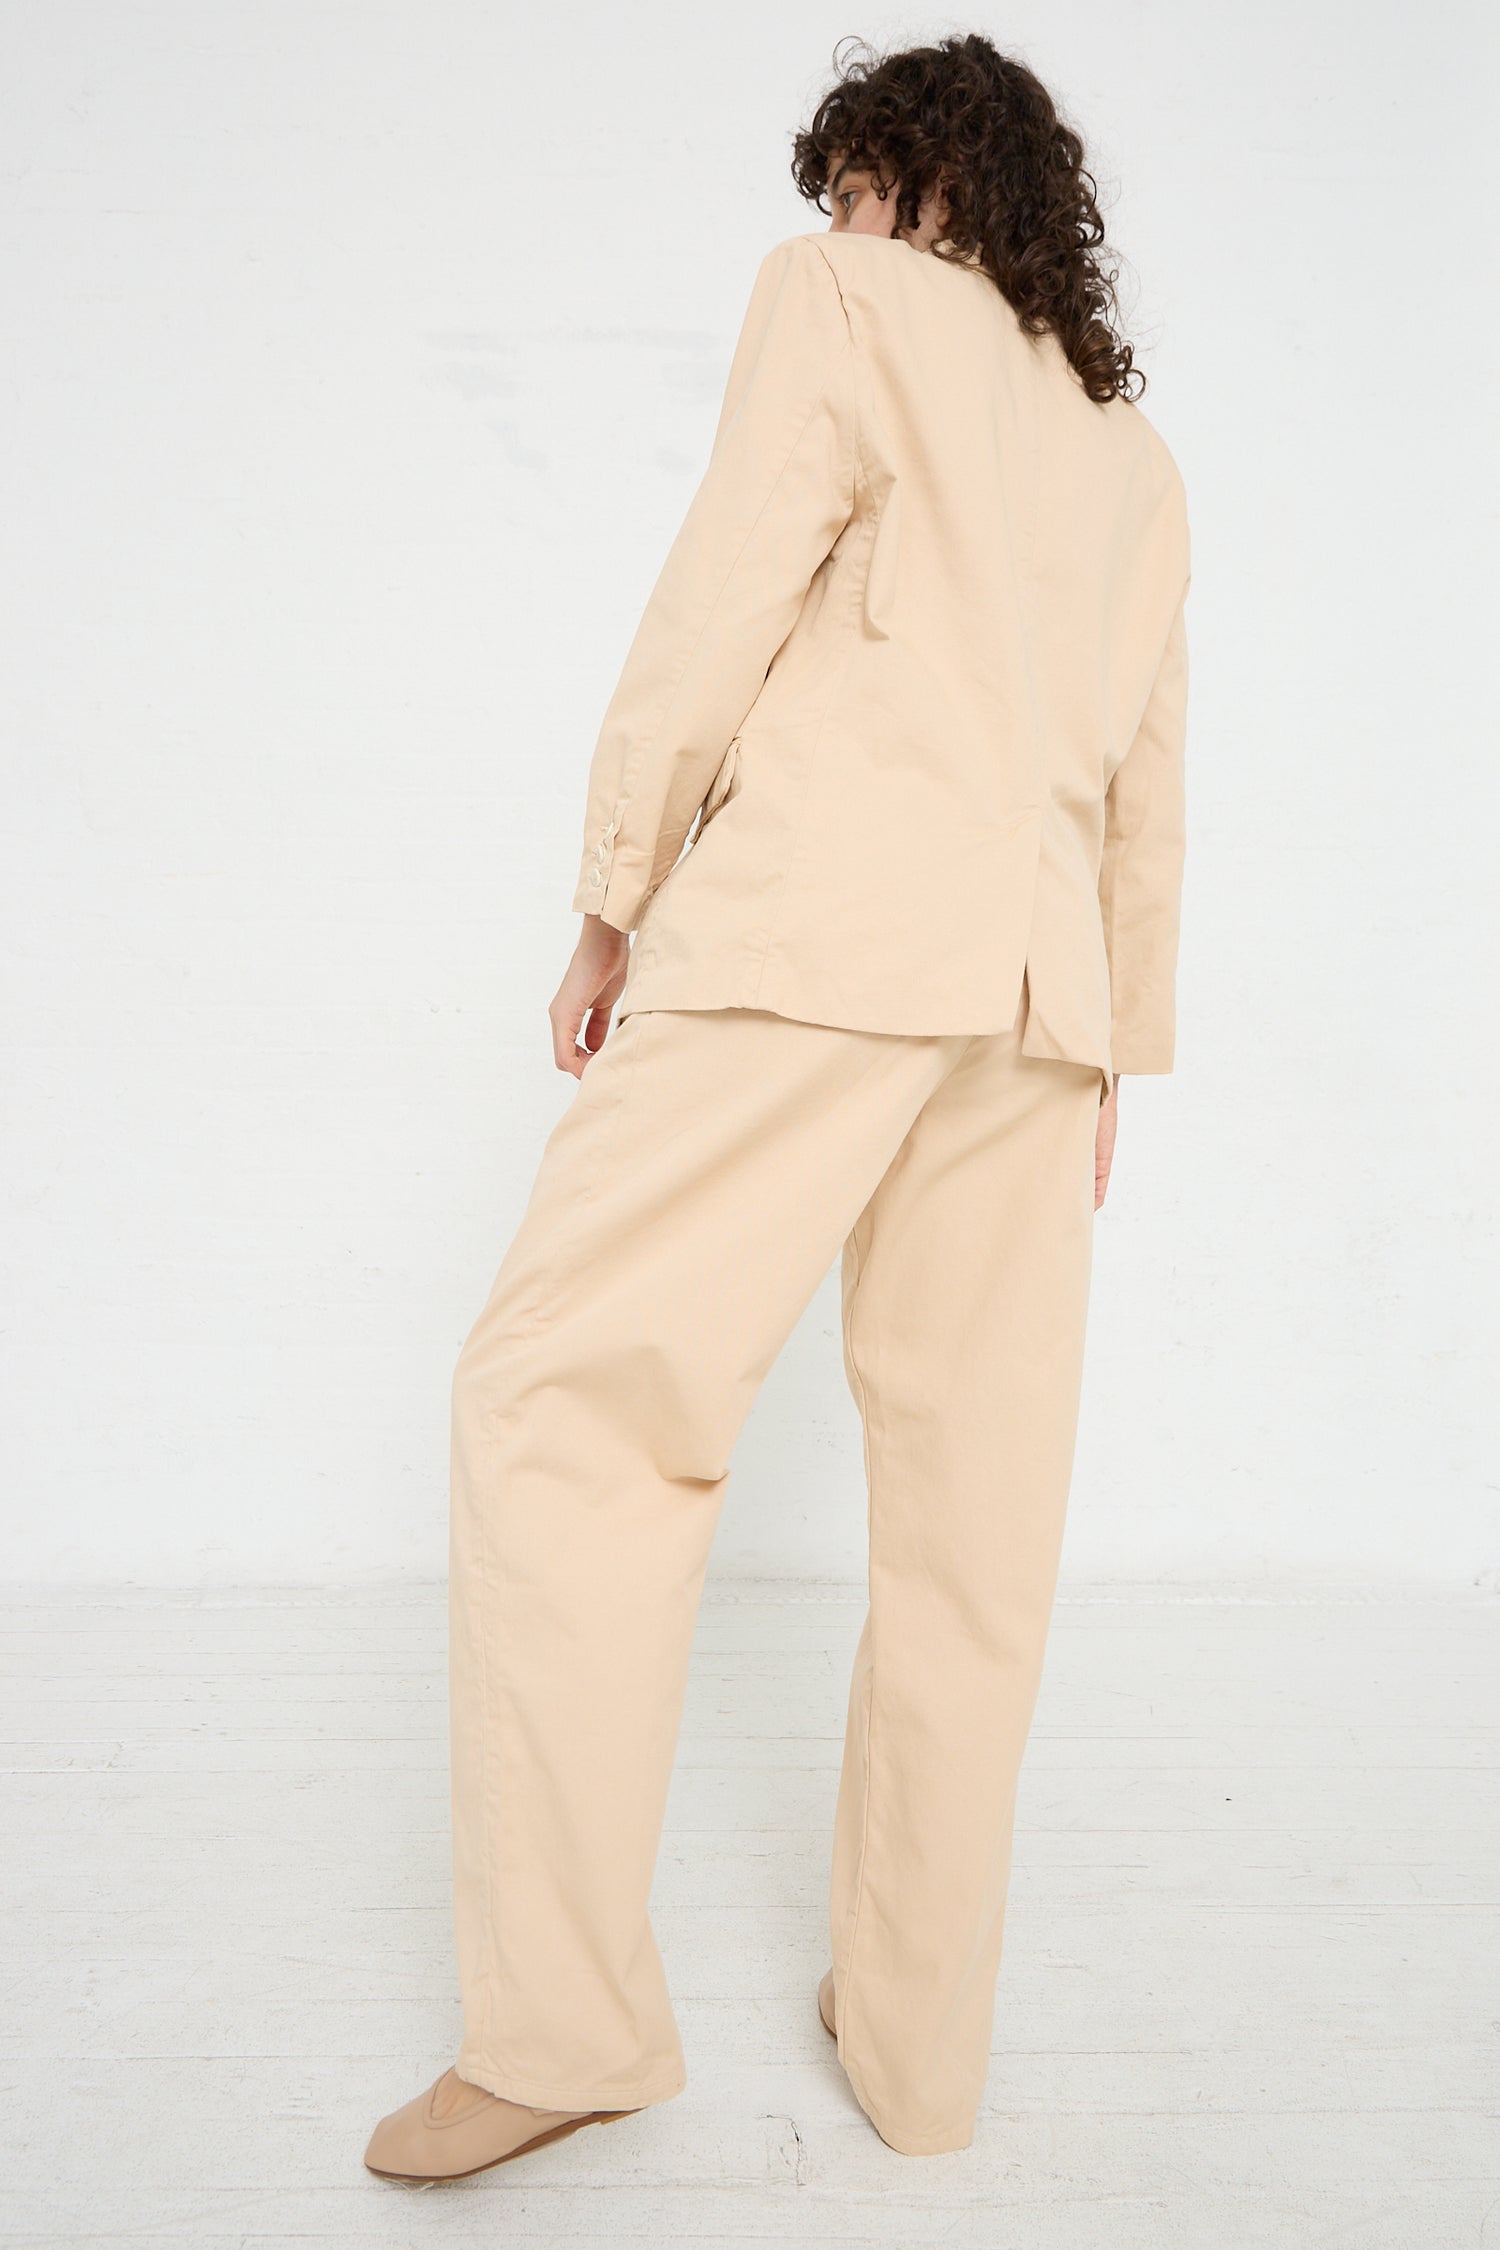 A woman wearing a Jesse Kamm Trouser in Buff suit with tapered leg pants made from organic cotton twill.